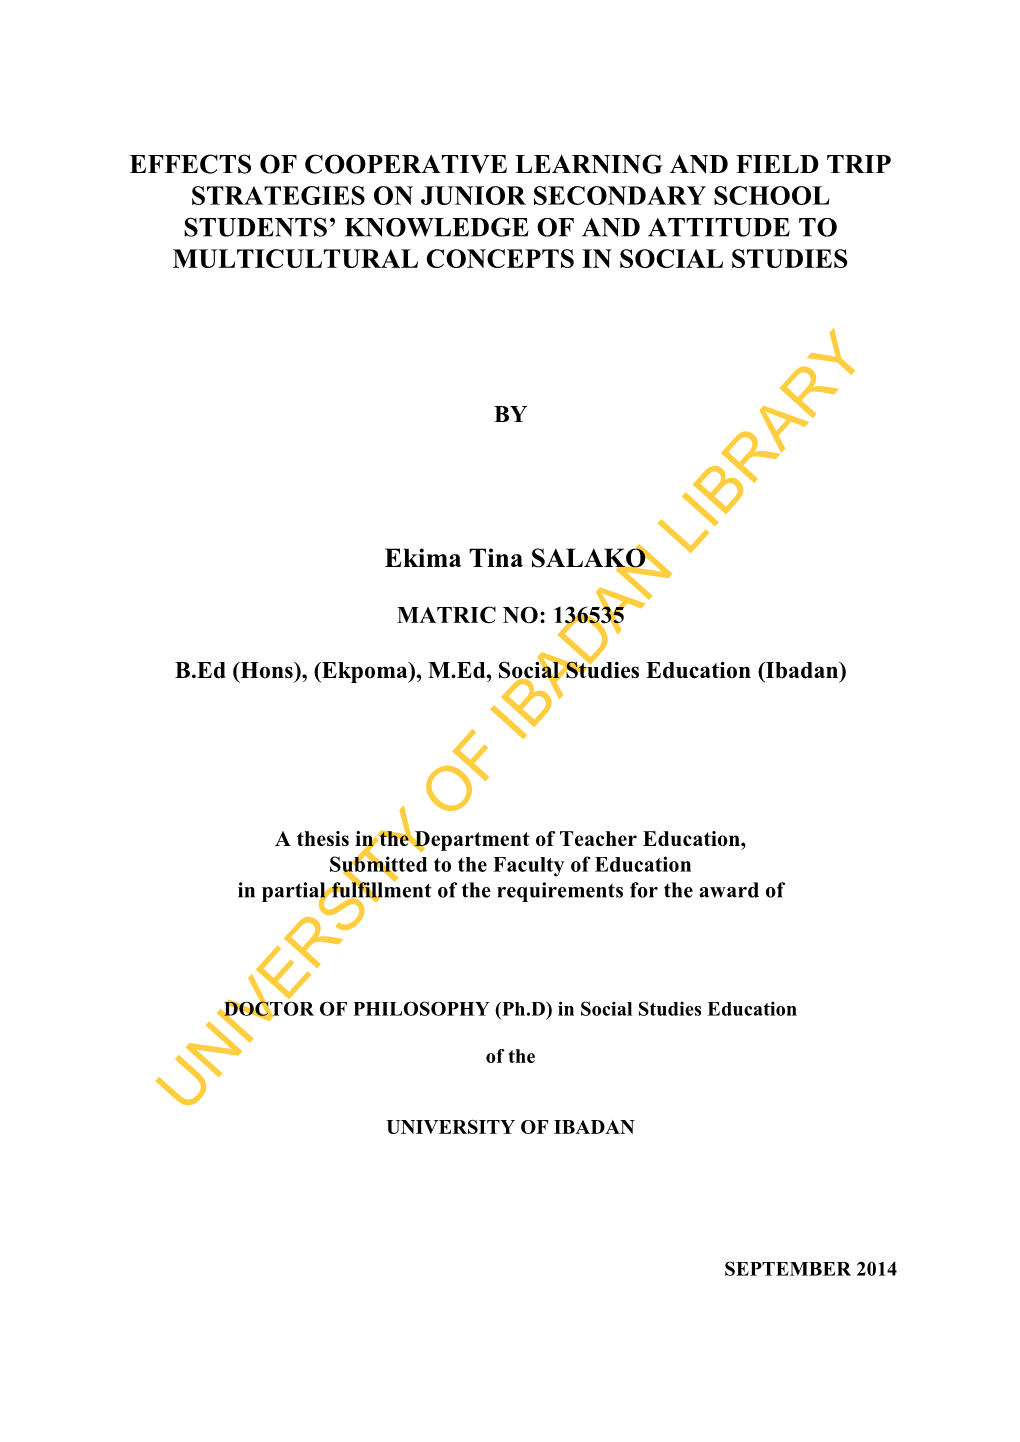 Effects of Cooperative Learning and Field Trip Strategies on Junior Secondary School Students’ Knowledge of and Attitude to Multicultural Concepts in Social Studies